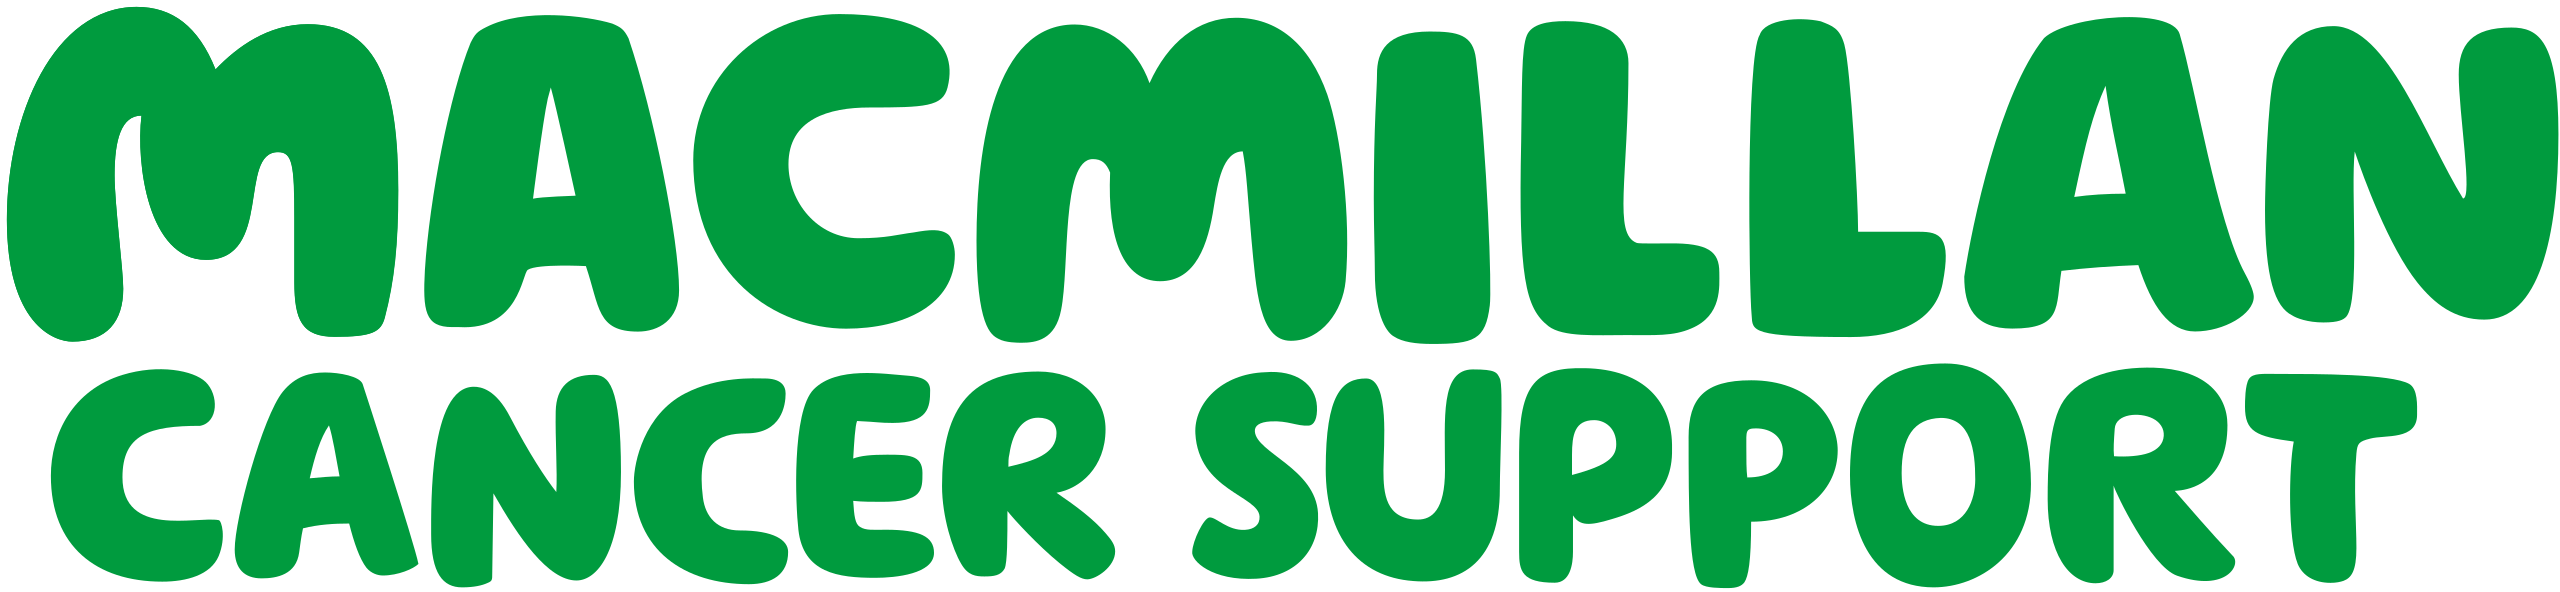 2560px-Macmillan_Cancer_Support_logo.svg.png